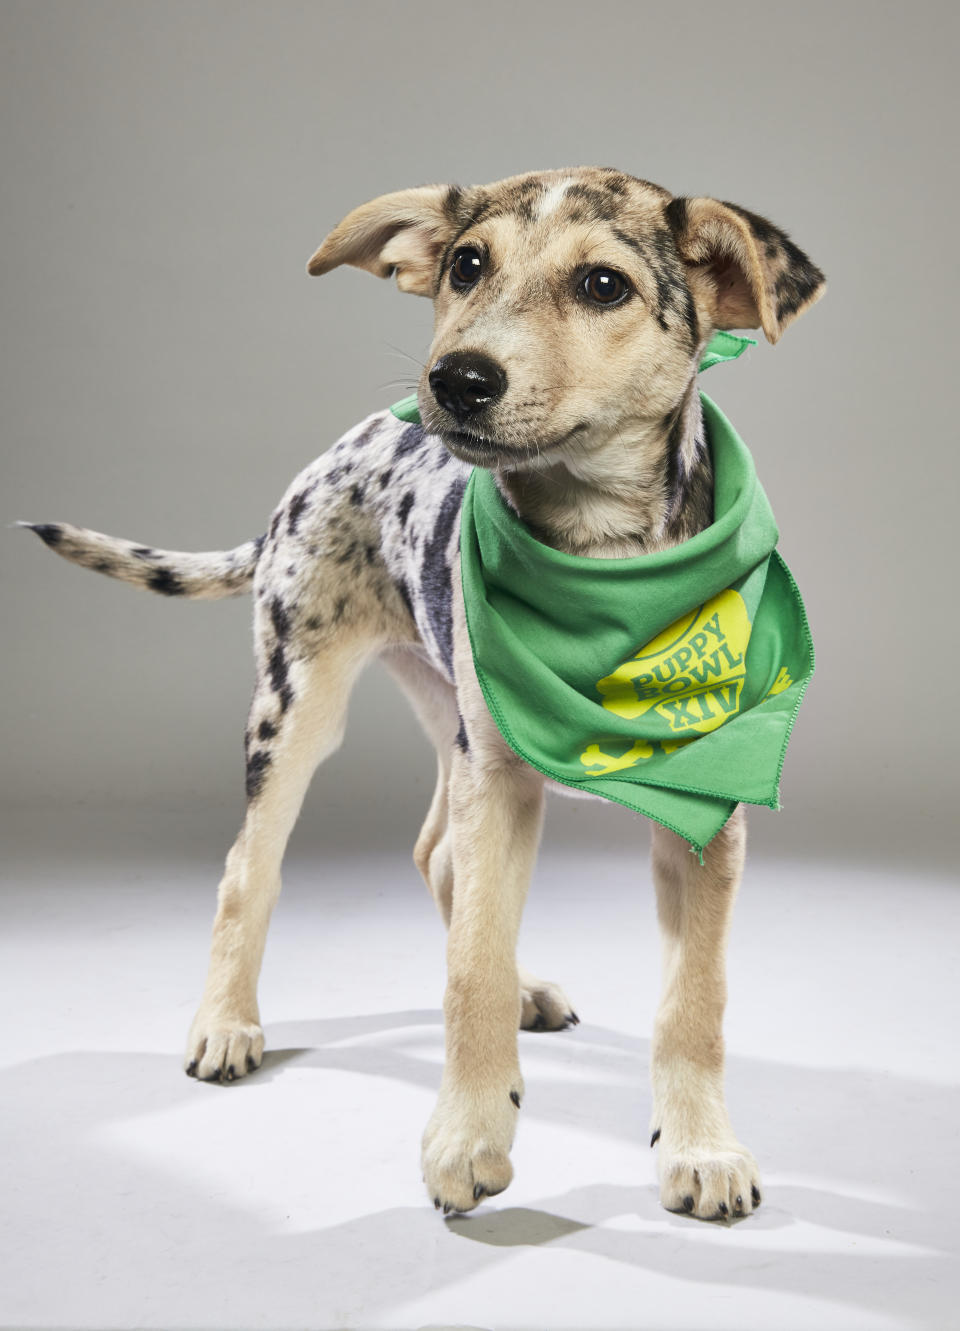 <p>Team: Ruff<br> From: Sebastian County Humane Services<br> (Photo: Animal Planet) </p>